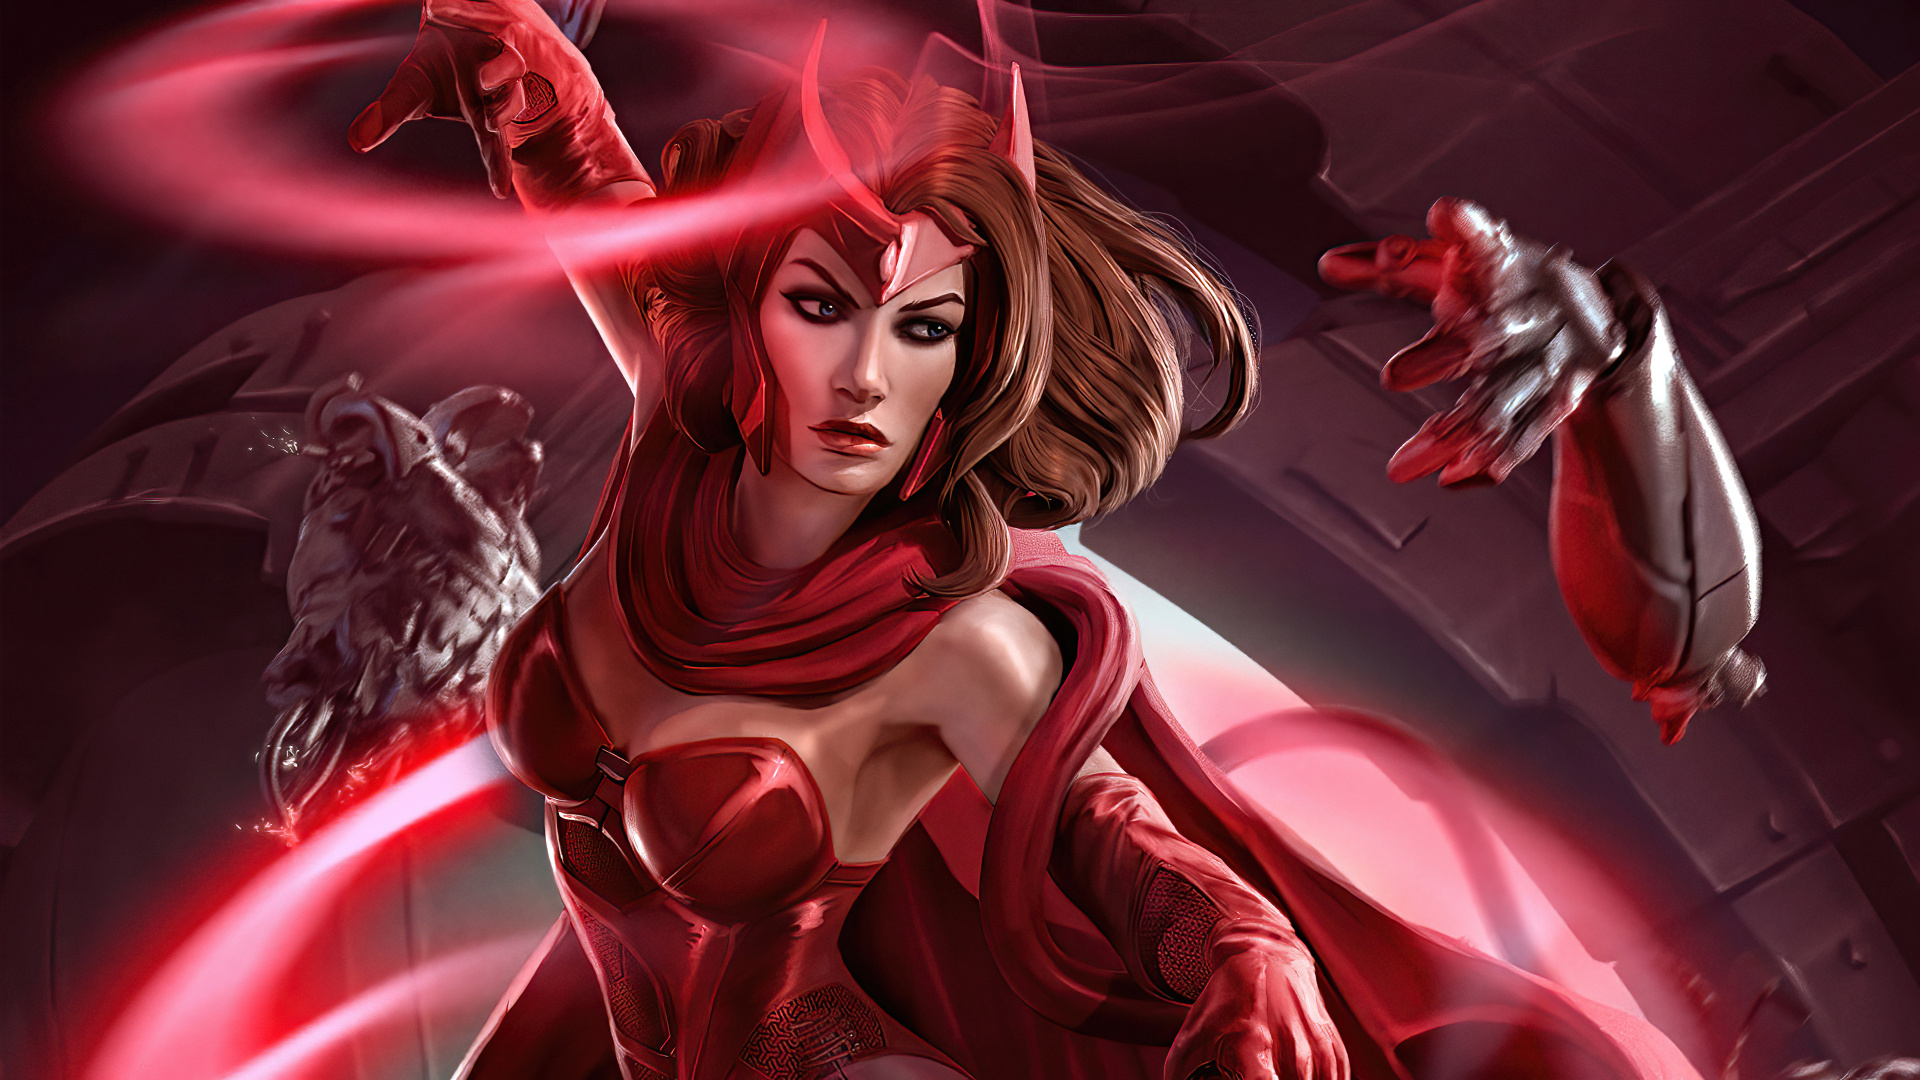 Scarlet Witch, Marvel Scarlet Witch Art, Wanda Maximoff, Hulk, Vision. Wallpaper in 1920x1080 Resolution